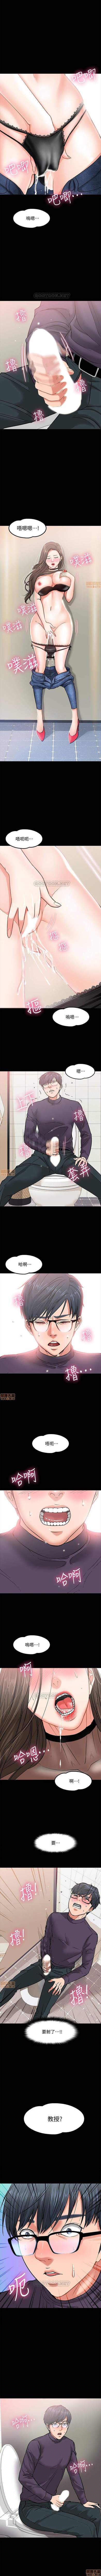 PROFESSOR, ARE YOU JUST GOING TO LOOK AT ME? | DESIRE SWAMP | 教授，你還等什麼? Ch. 3 [Chinese] Manhwa 7